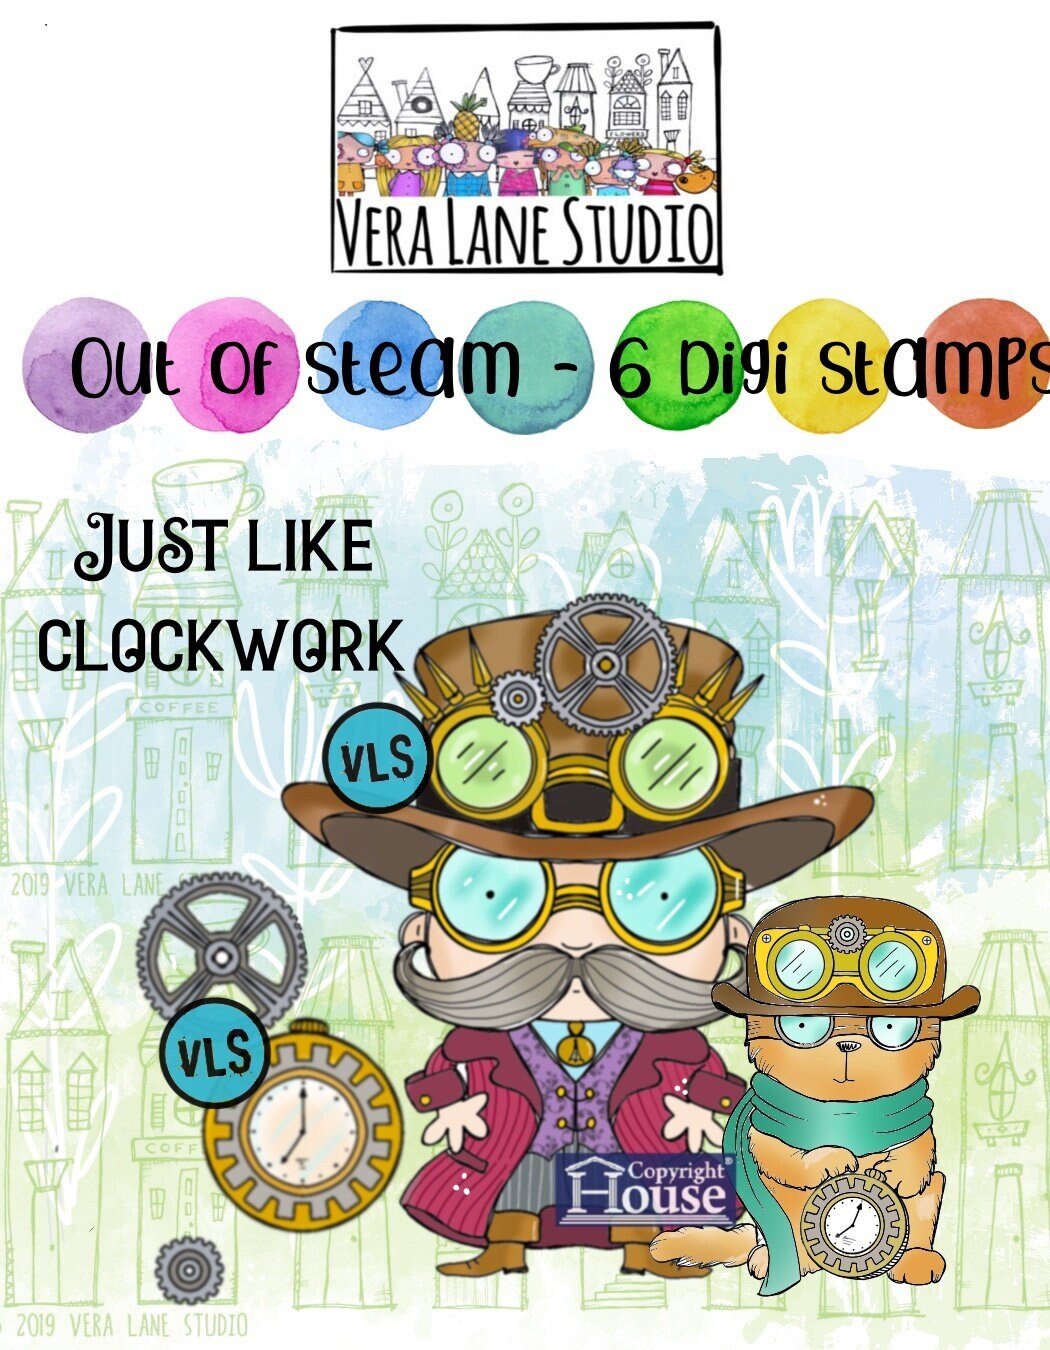 Out of Steam - 6 digi stamps in jpg and png files